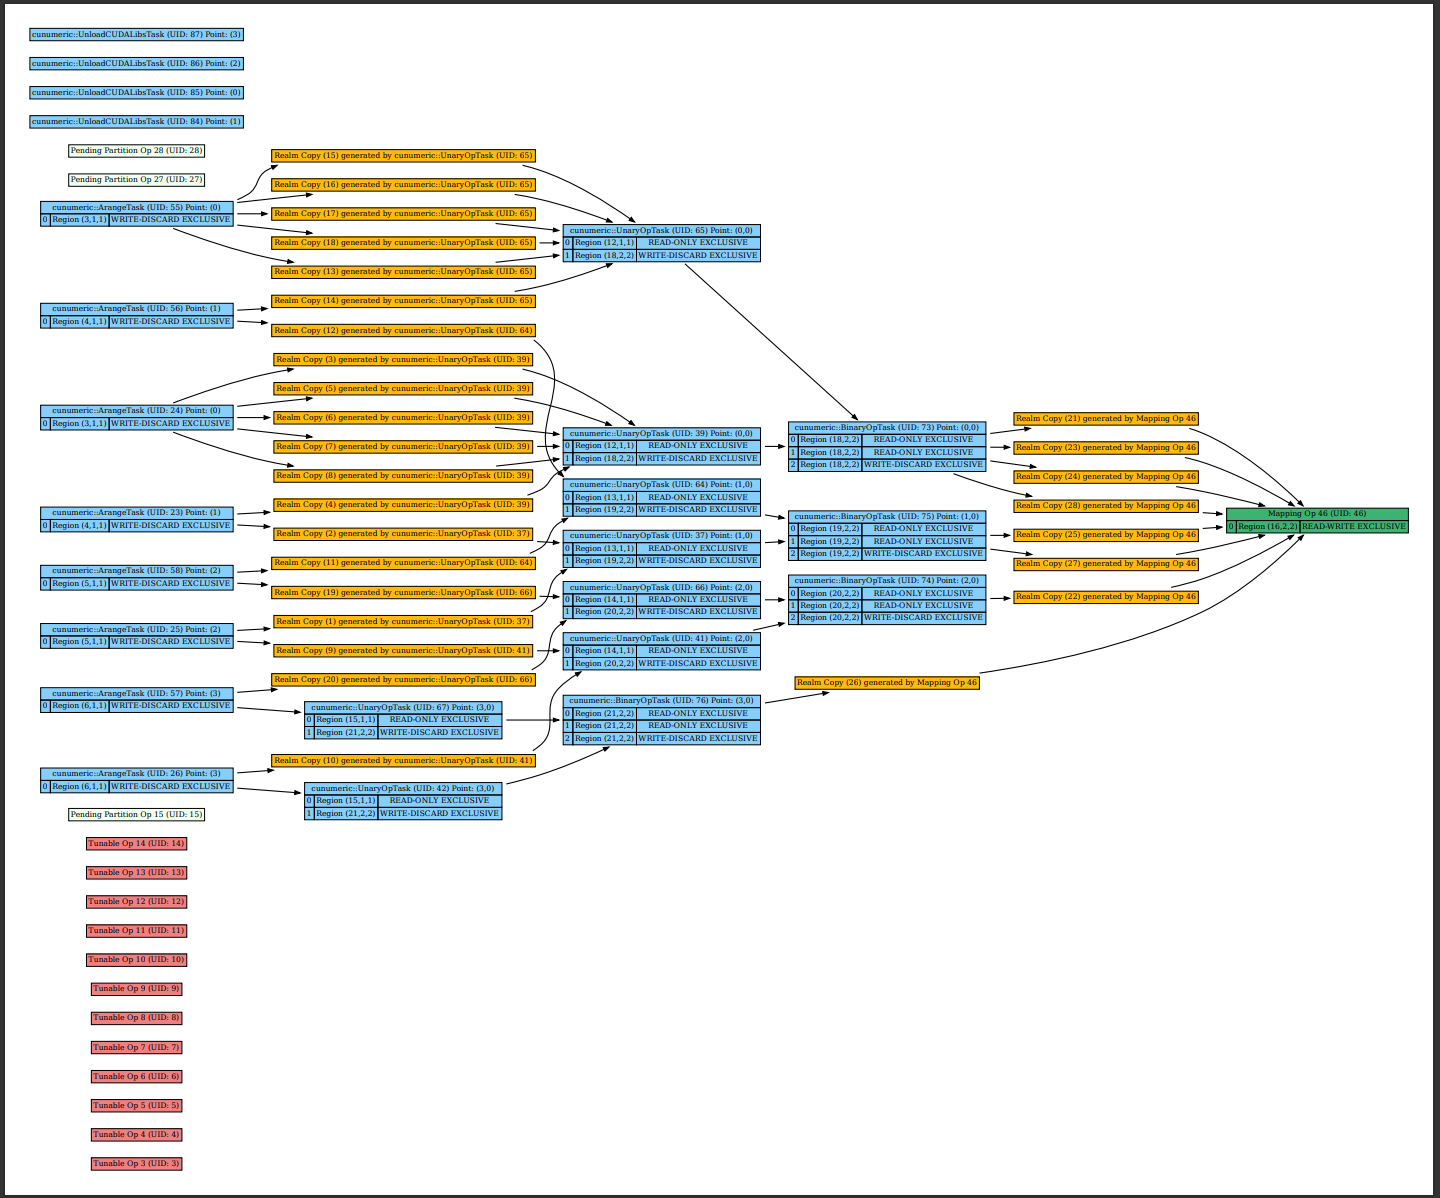 A data flow chart representing step-by-step execution of partitioned cuNumeric Python code and its interdependencies.